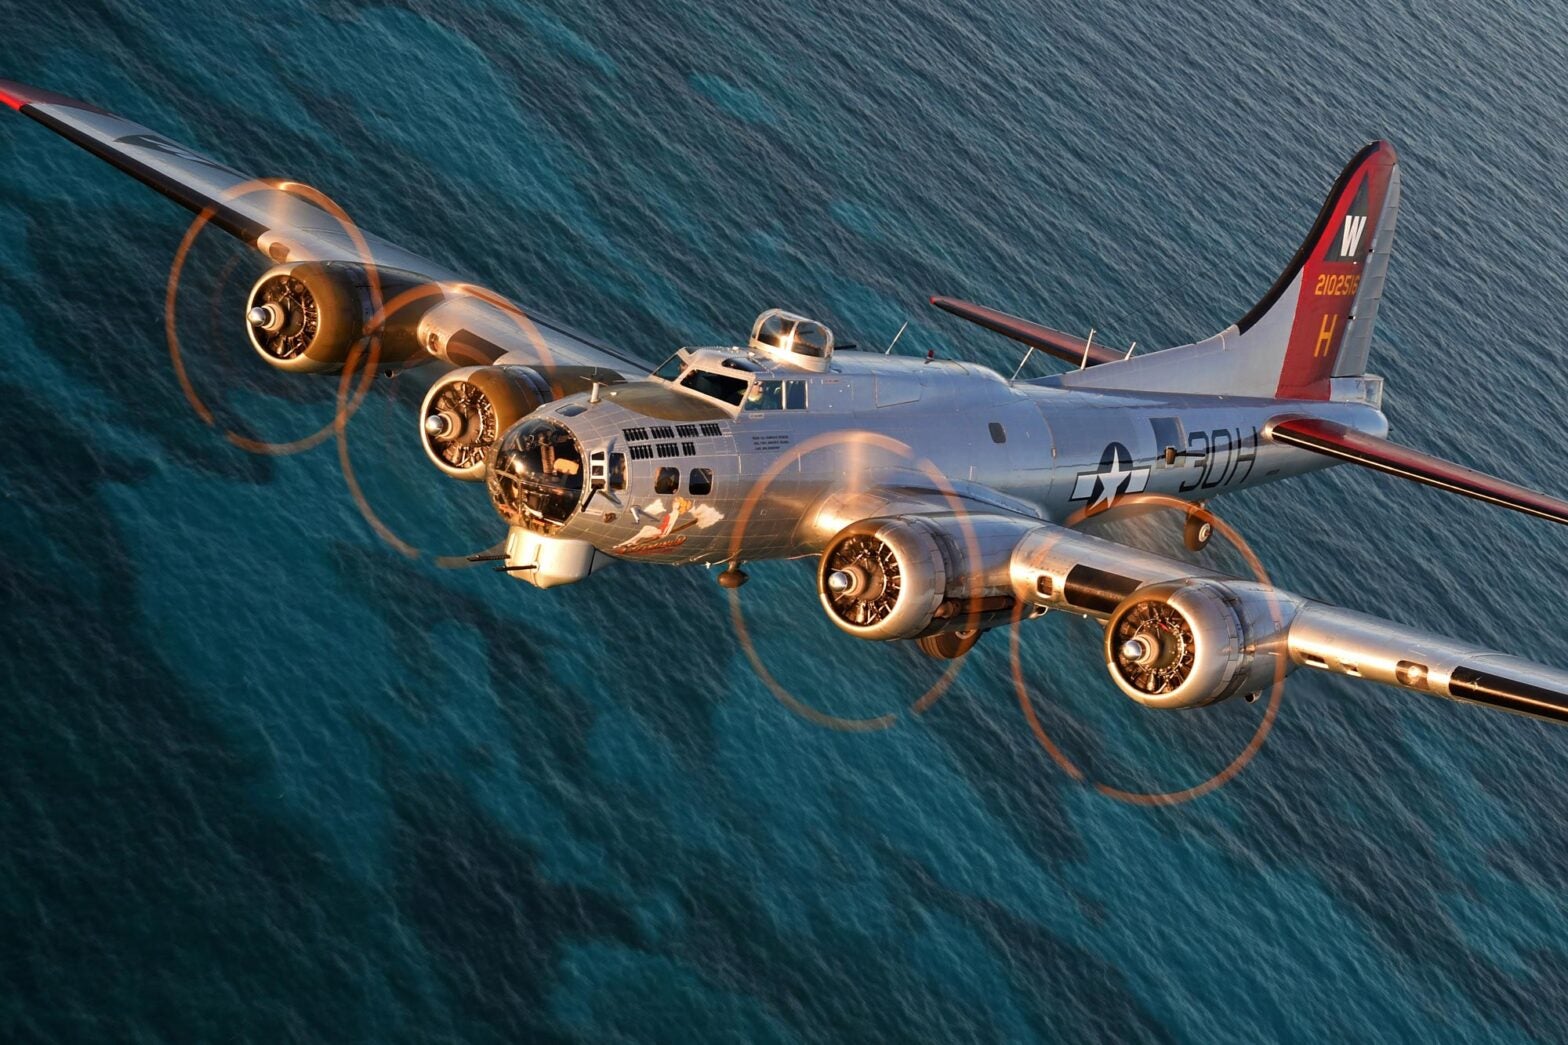 Warbird Fans Welcome Return of EAA’s B-17 on Tour